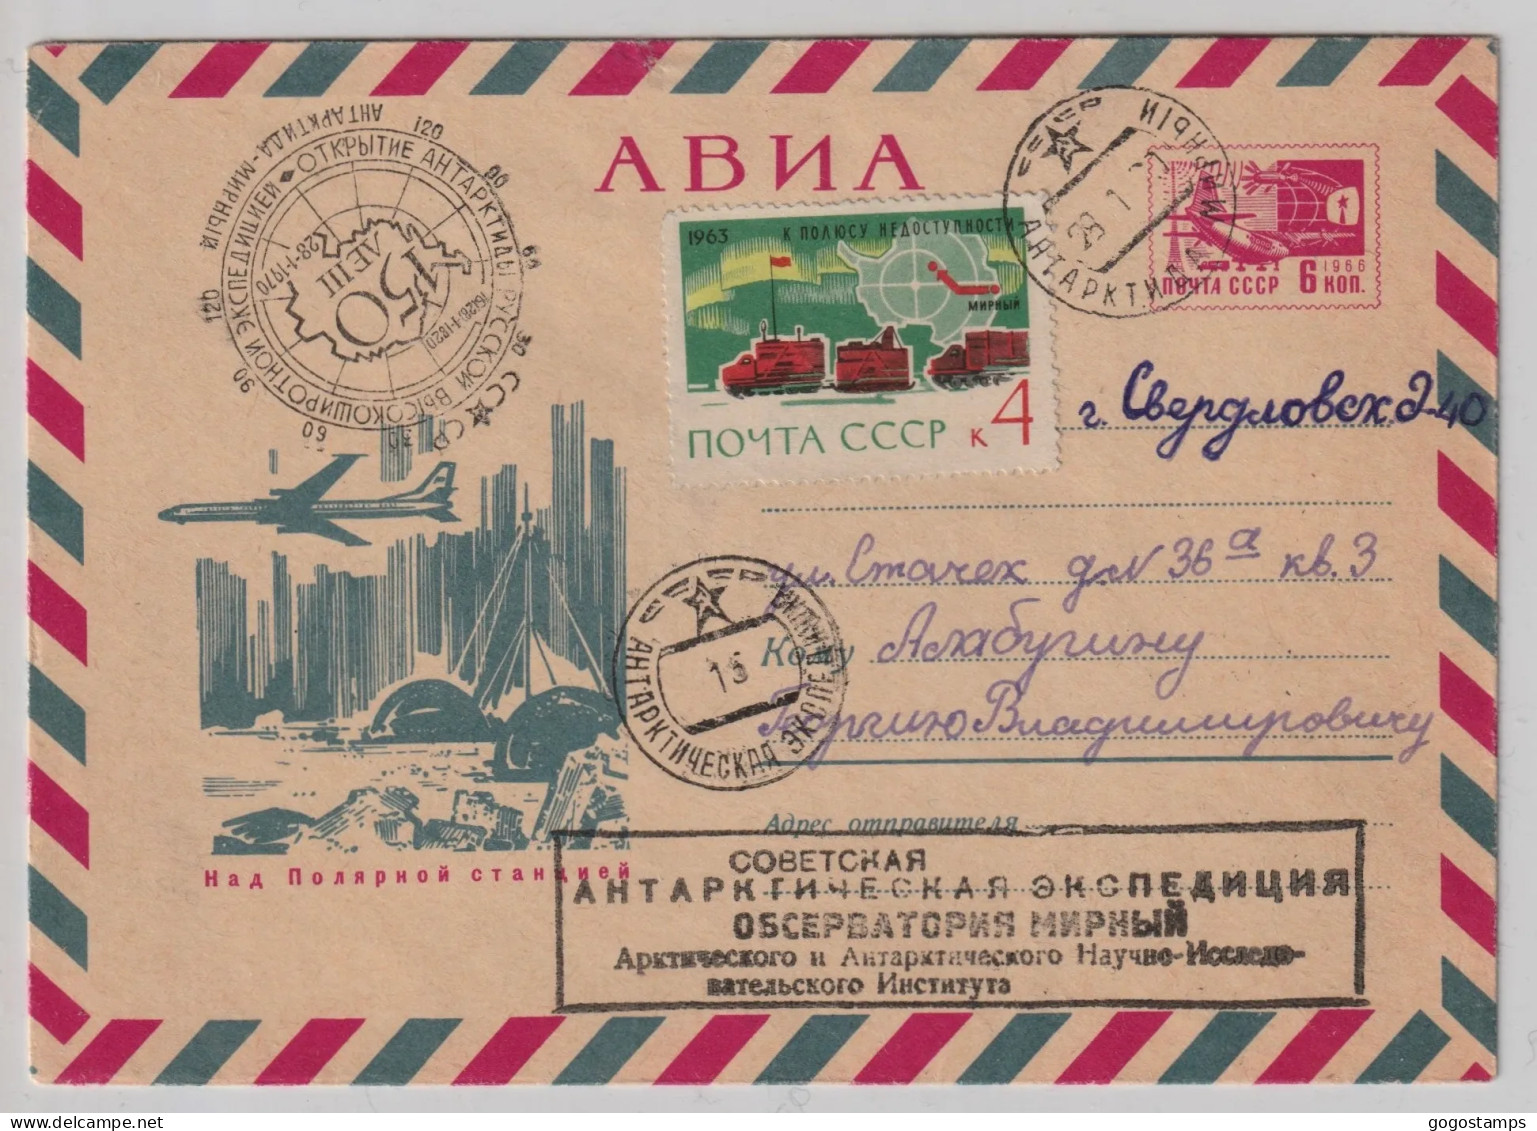 Franked Cover – Sent From Soviet Antarctic Expedition, Mirny Observatory - Express Mail